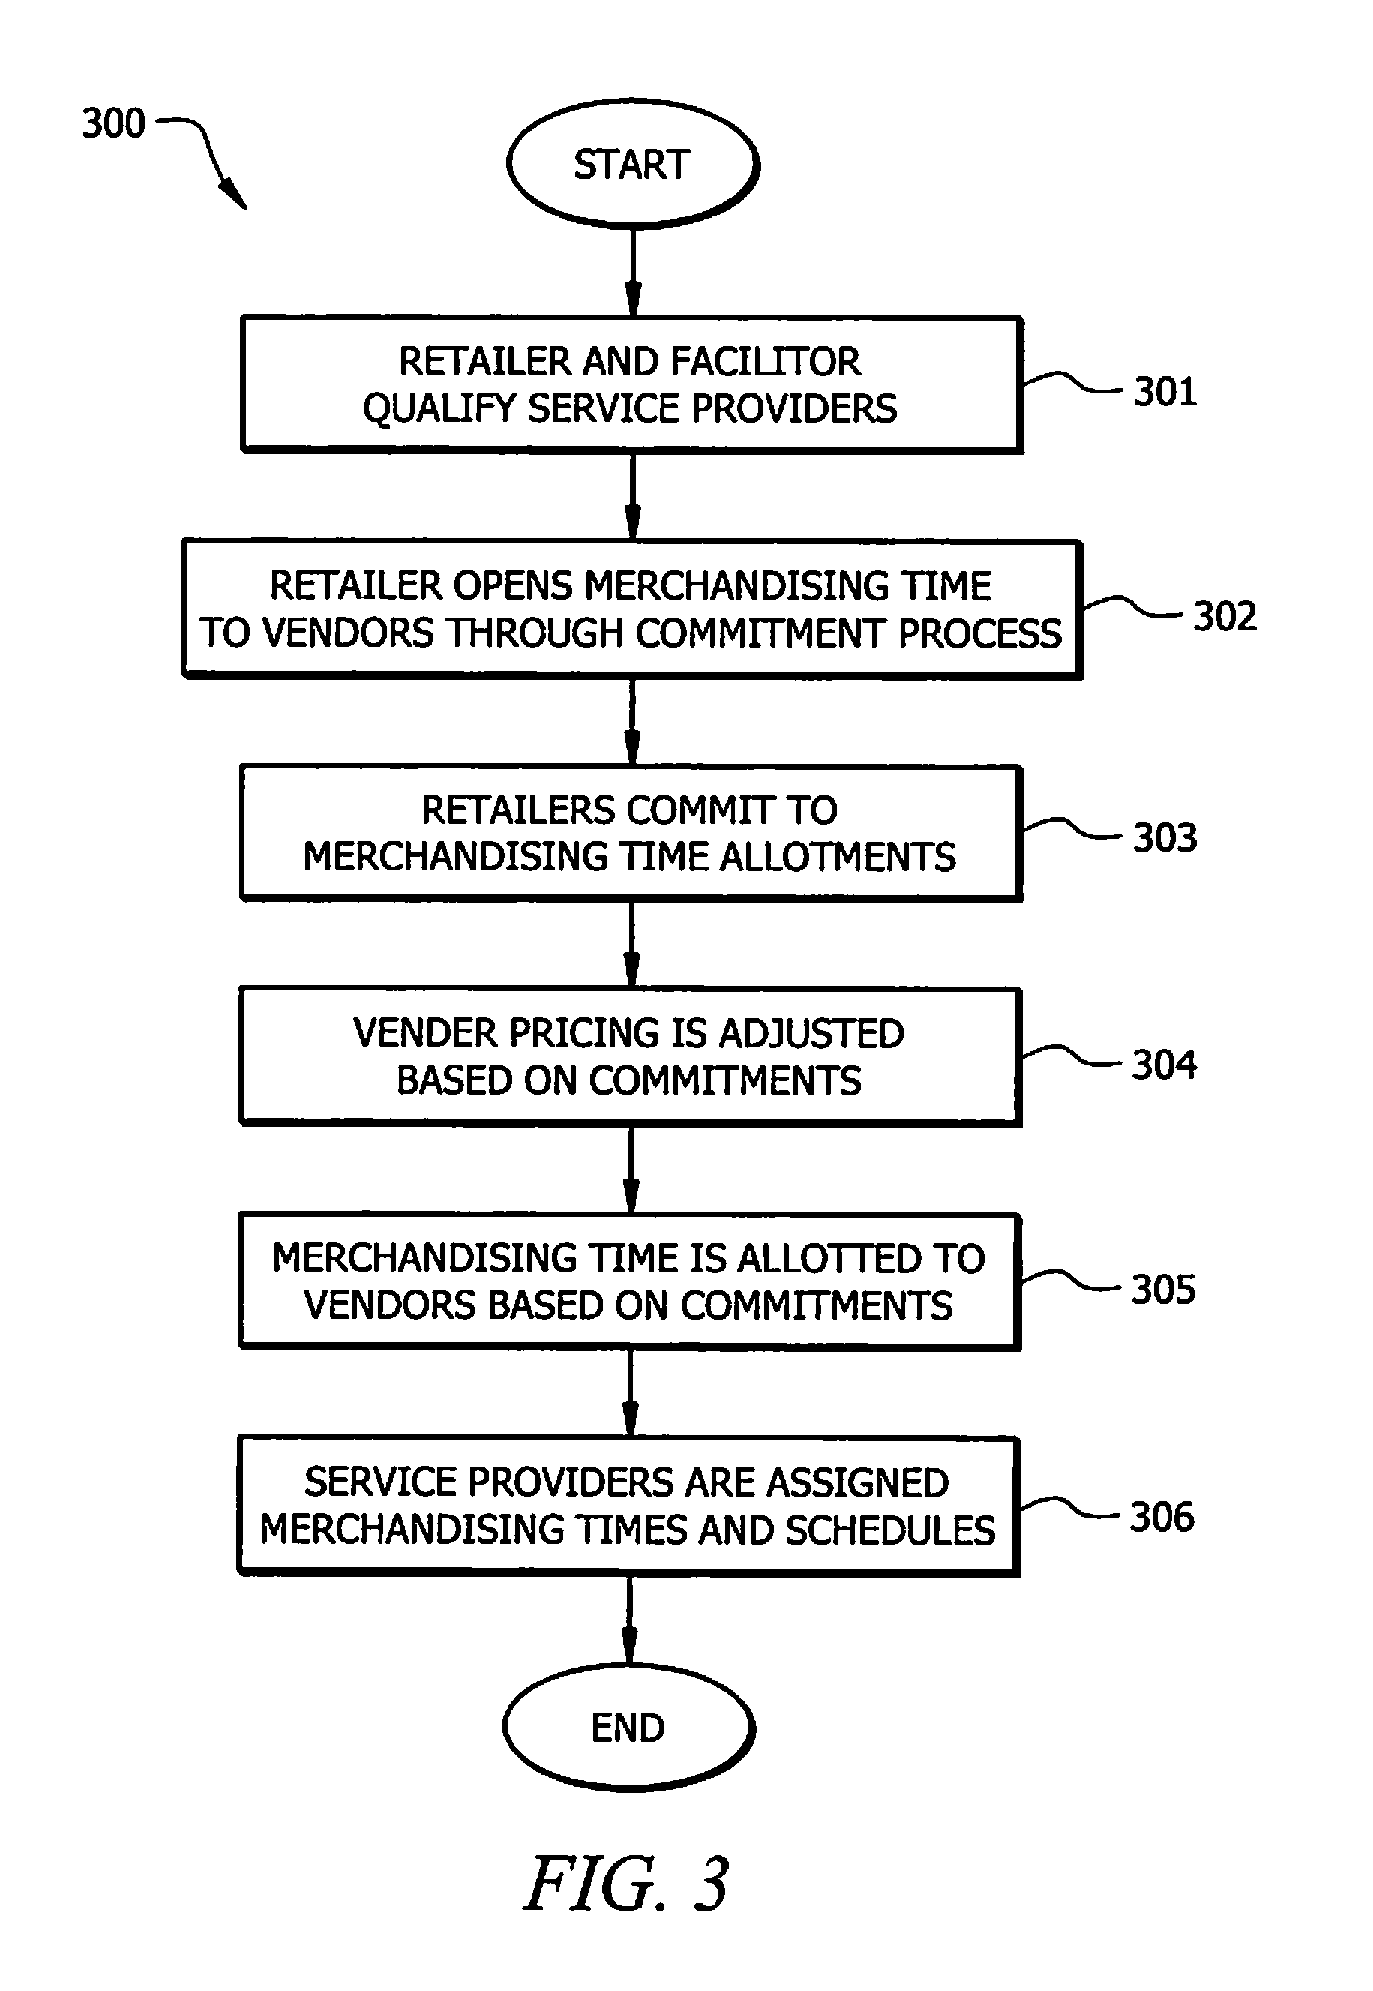 System and Method for Optimizing Allocation of Merchandising Resources and Pricing